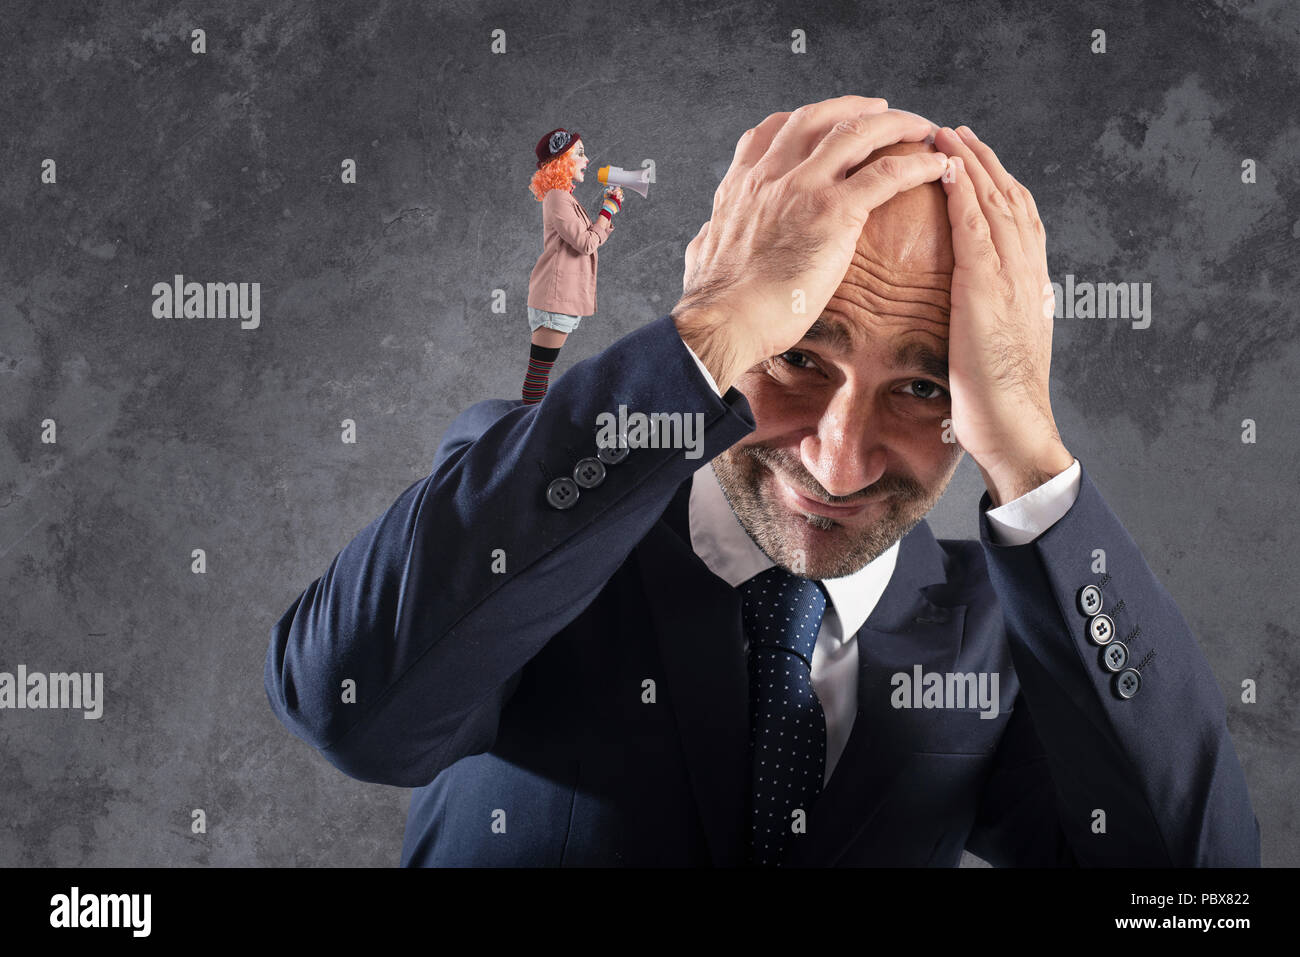 Clown that shuts with megaphone to a businessman Stock Photo